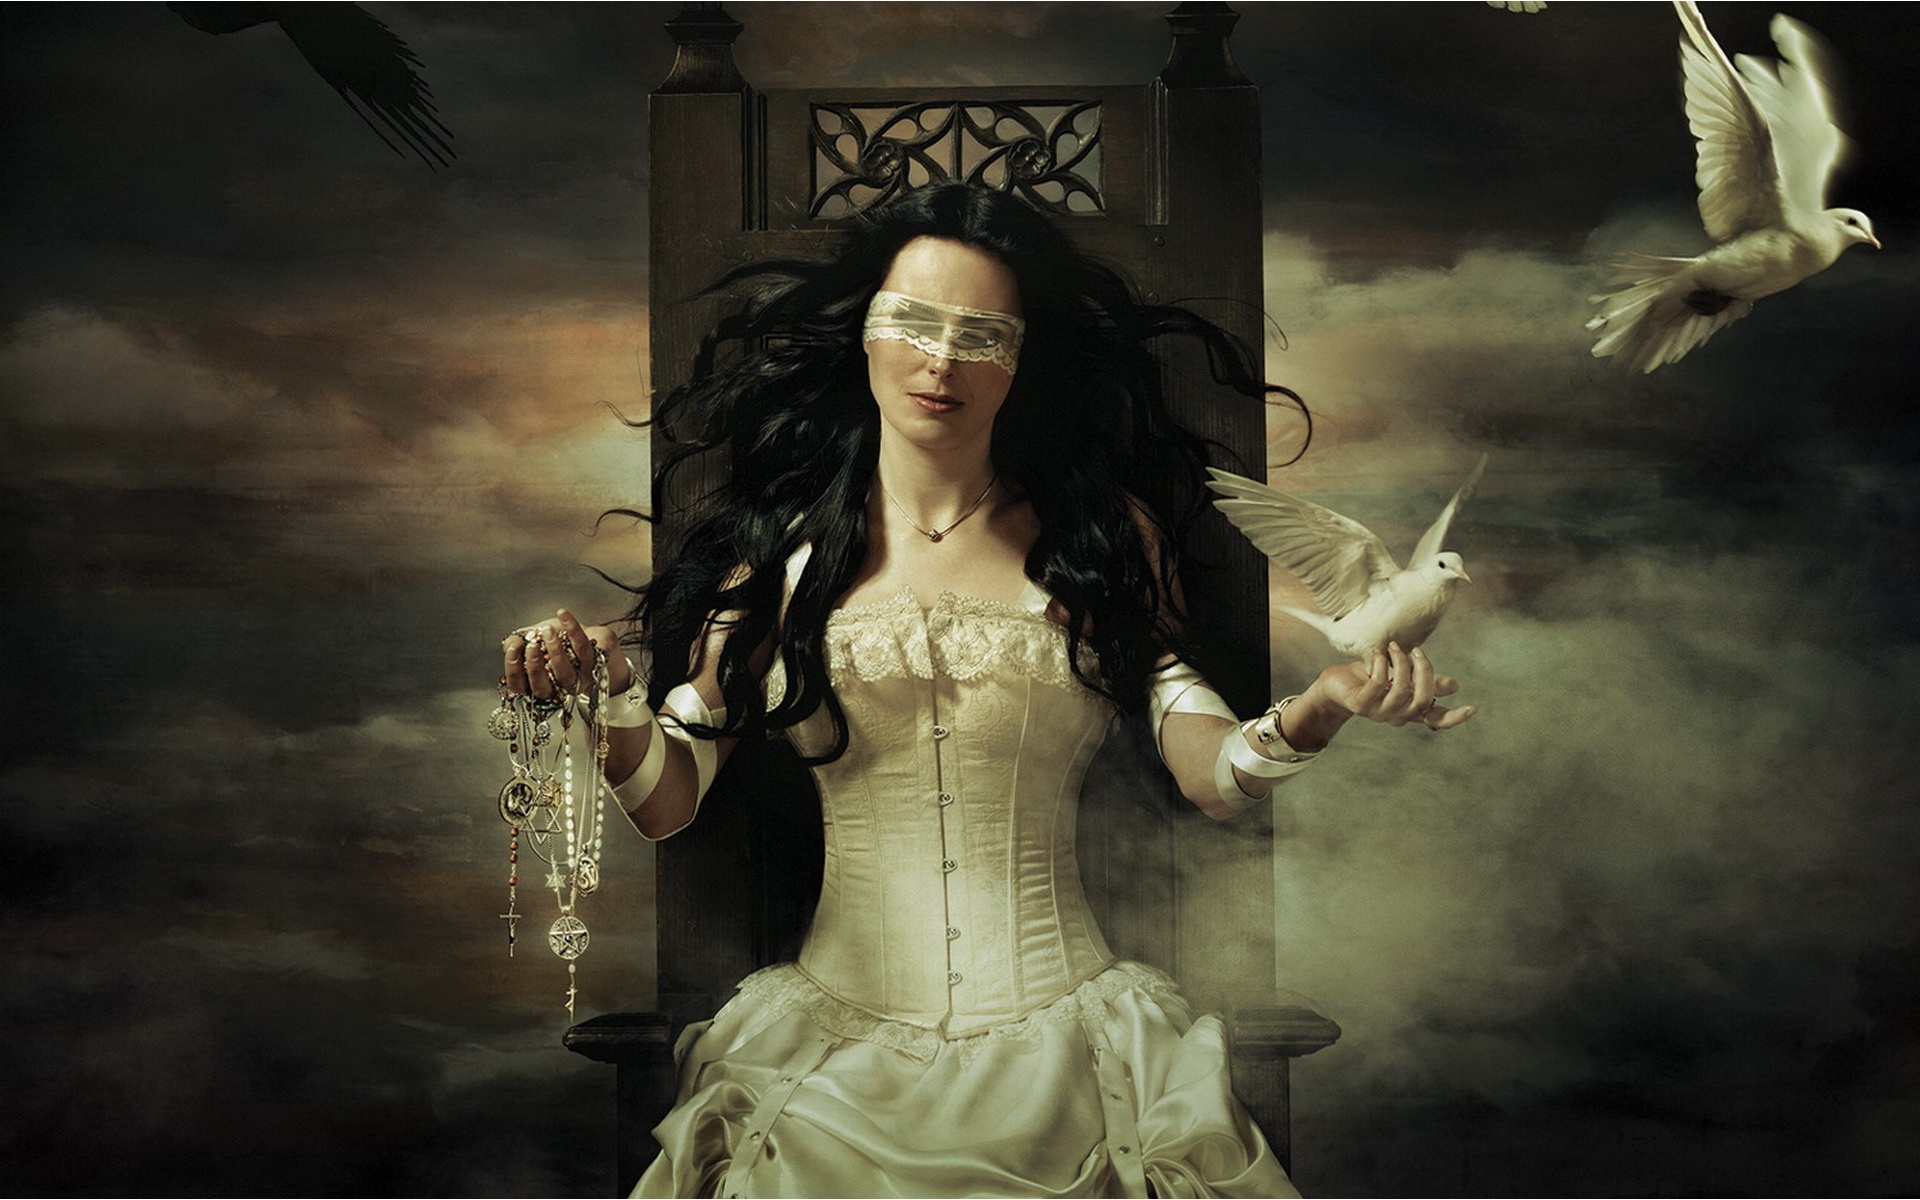 Dark gothic wallpaper featuring a blindfolded Sharon den Adel, with a dove, associated with Within Temptation music